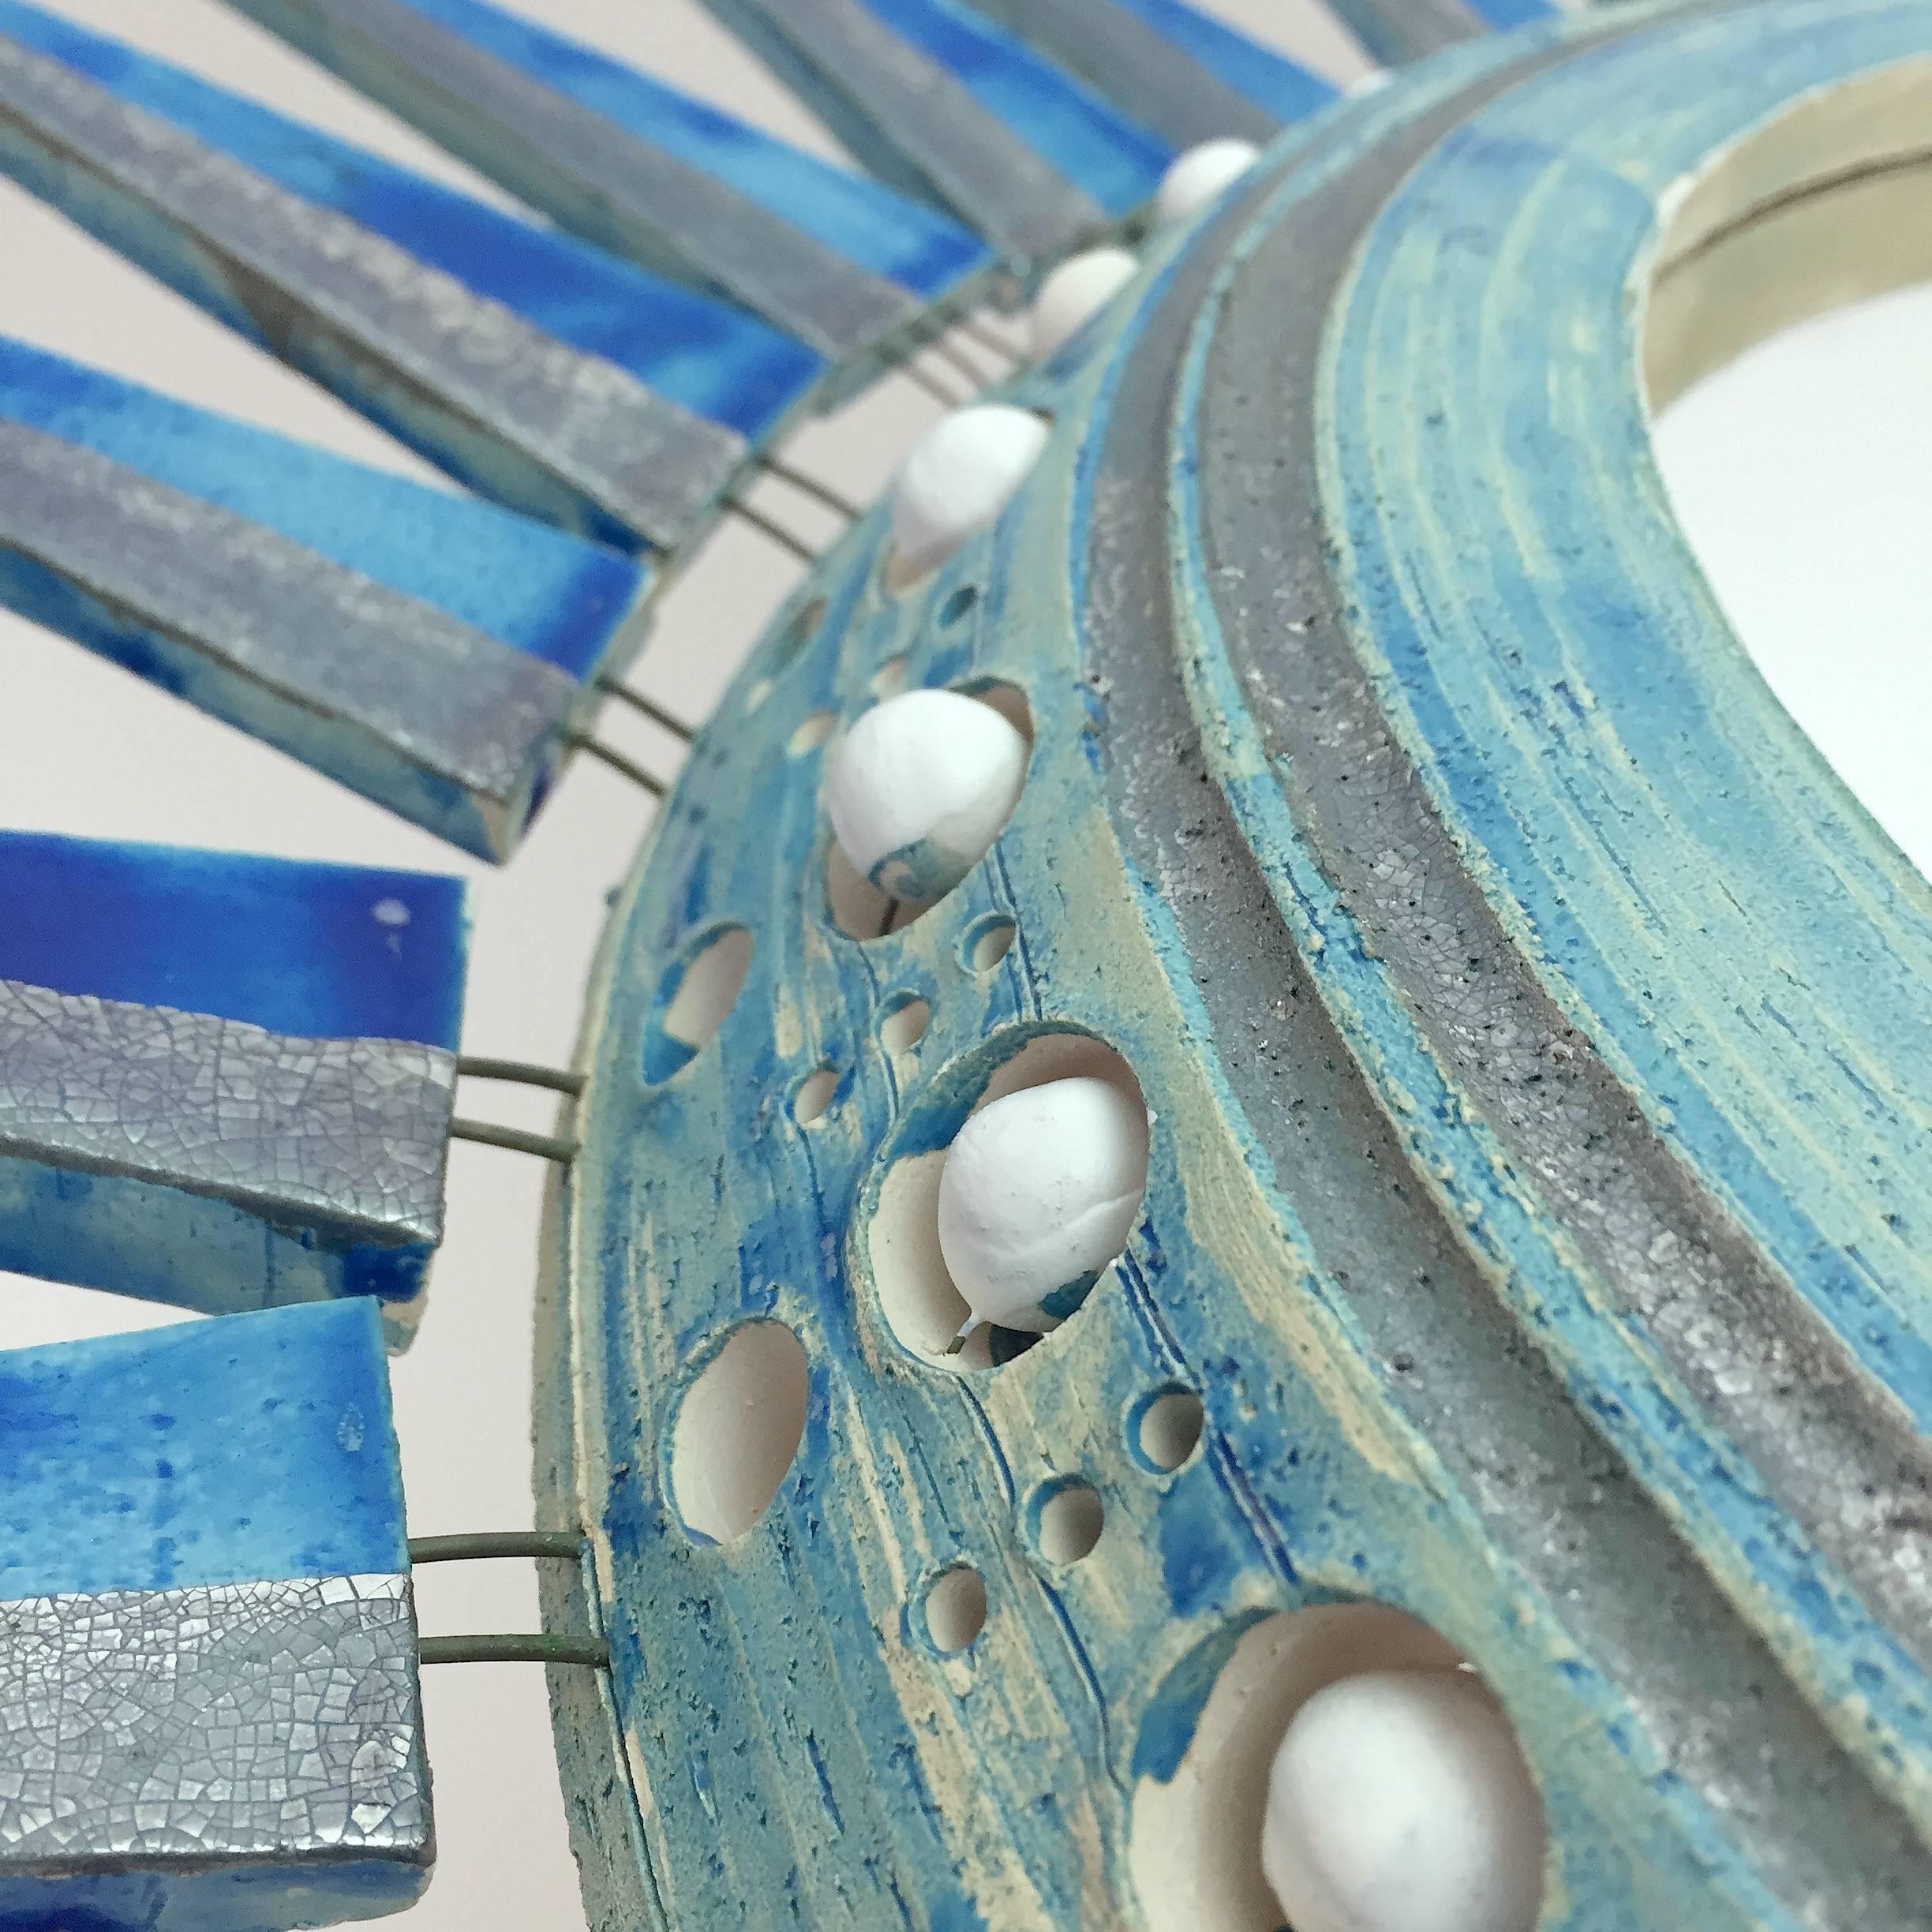 Important ceramic mirror, half glazed and enameled in shades of blue, turquoise, white and crackled silver. 
One of a kind piece in these blue color tons. 
Impressive one of kind piece, handmade by the French ceramicist, based on his genuine models